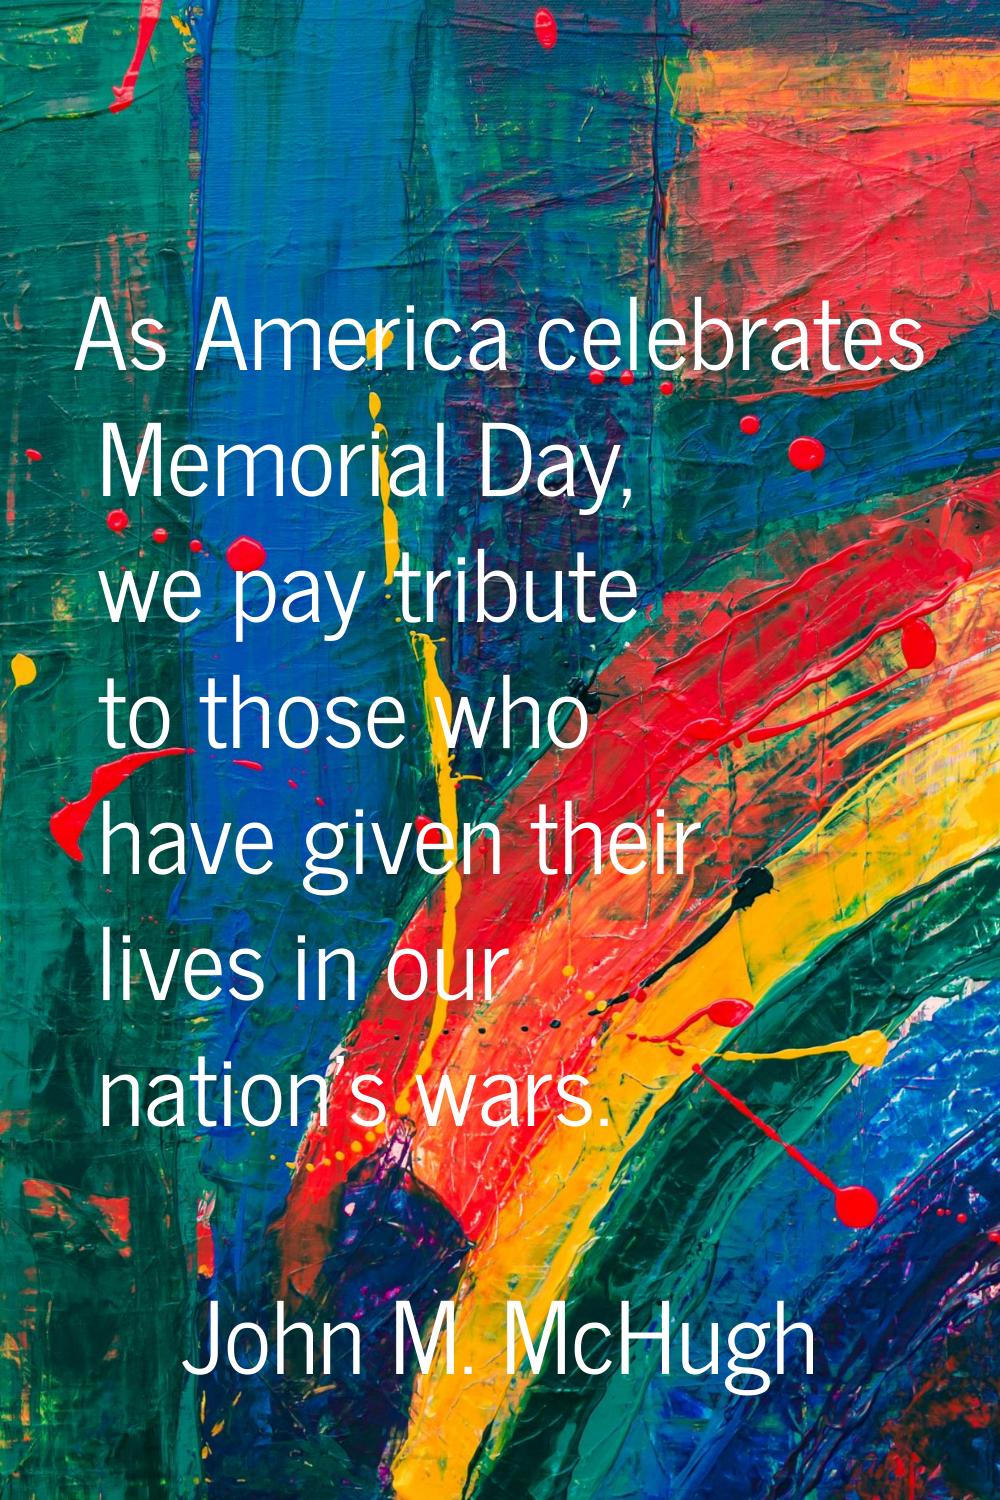 As America celebrates Memorial Day, we pay tribute to those who have given their lives in our natio